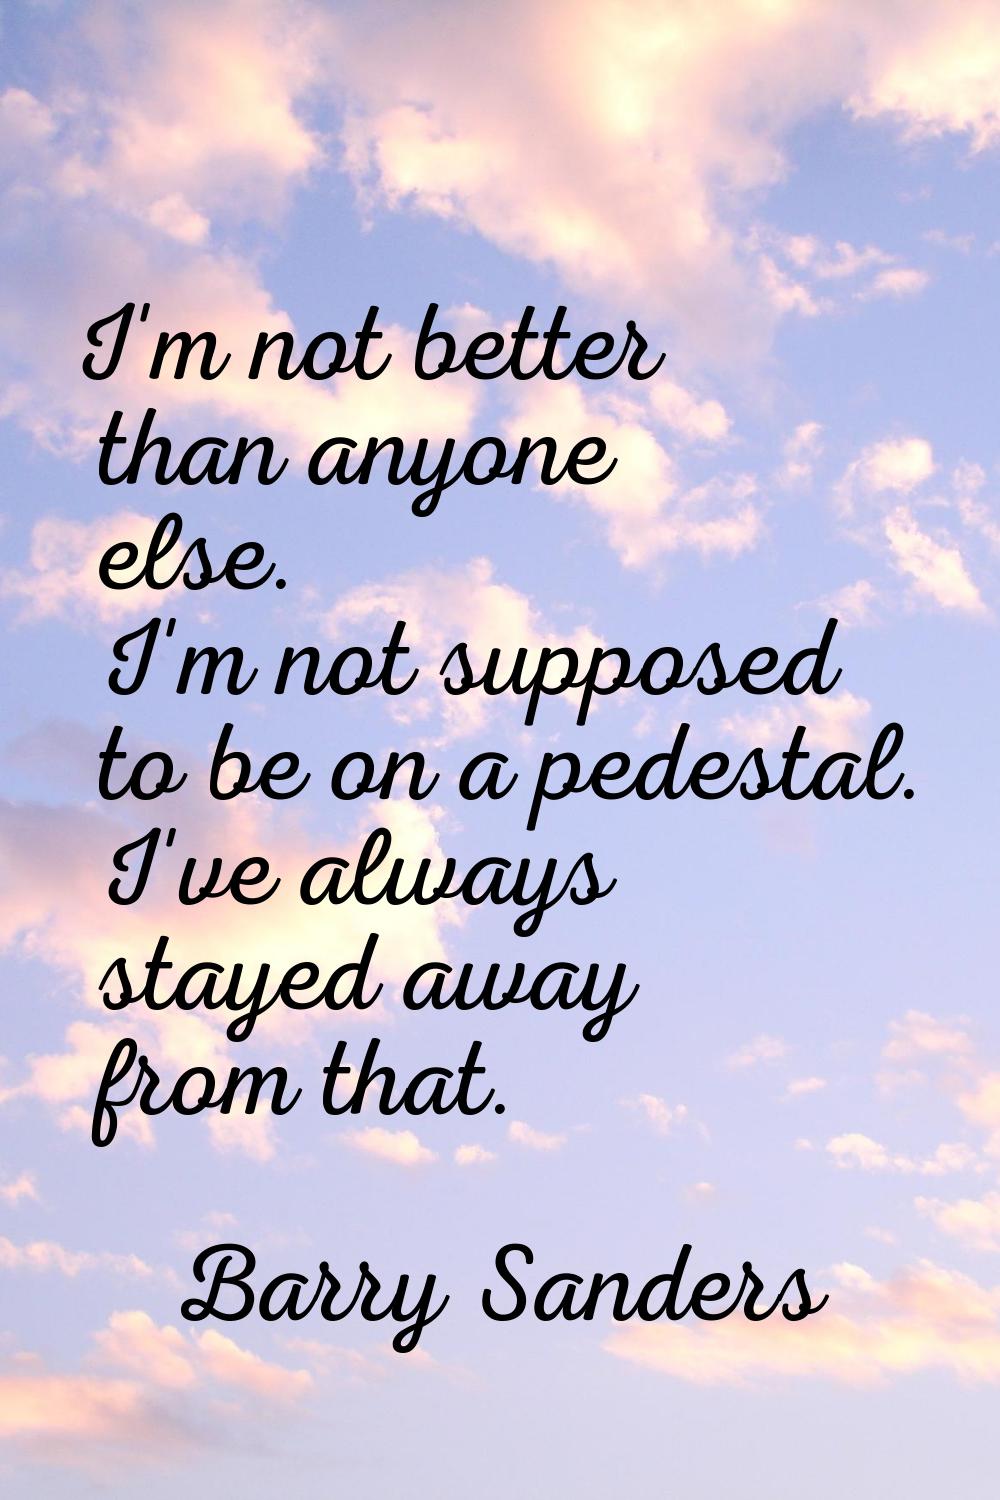 I'm not better than anyone else. I'm not supposed to be on a pedestal. I've always stayed away from